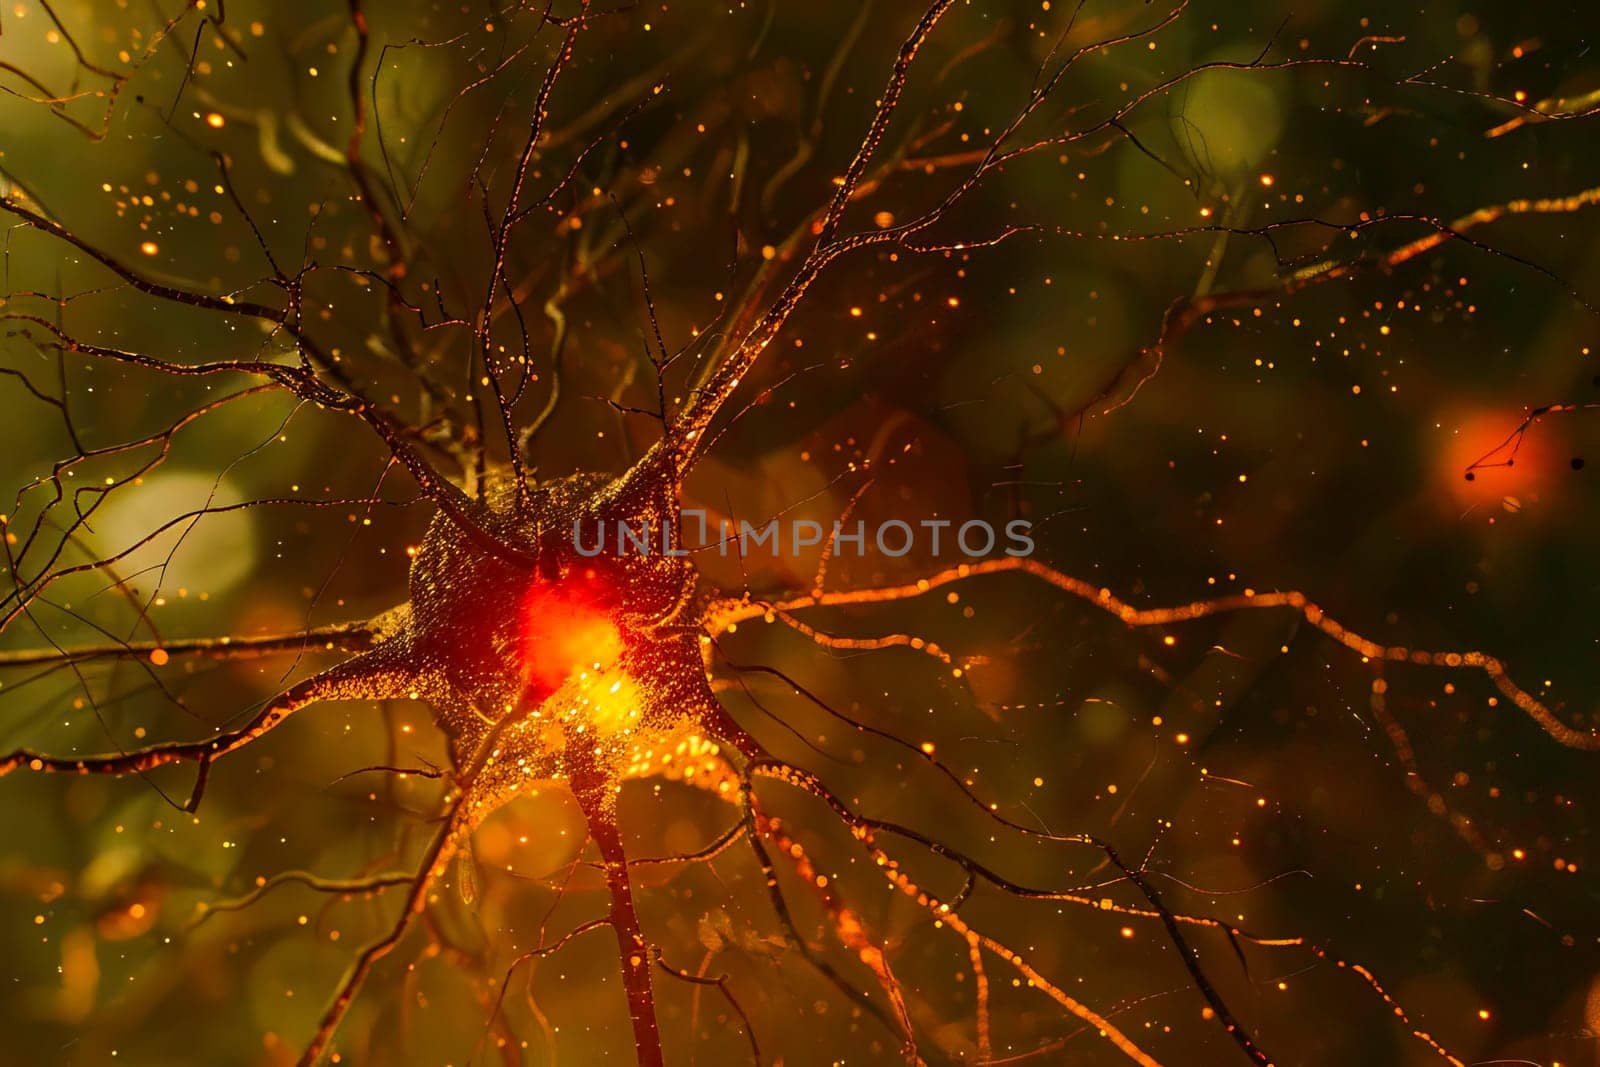 Neurons with electrical impulses in the brain, showcasing neural connections.